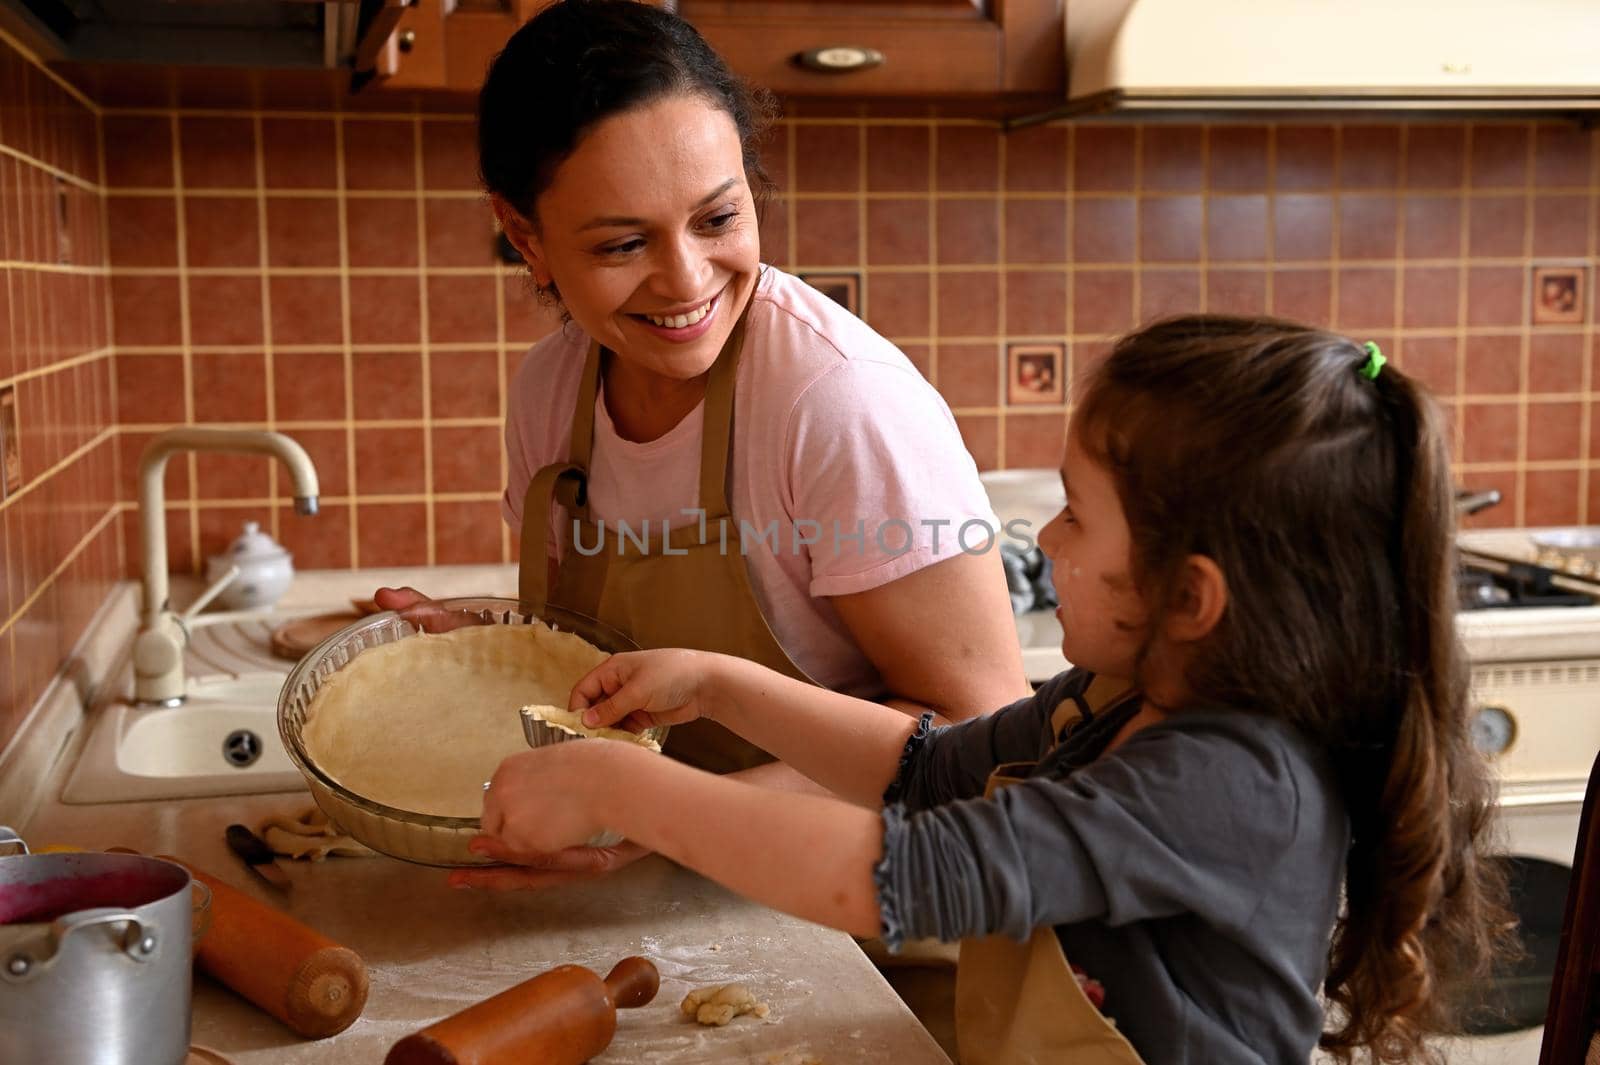 Mom and daughter smiling, laughing, playing, enjoying cooking together in kitchen, holding molds with rolled out dough by artgf